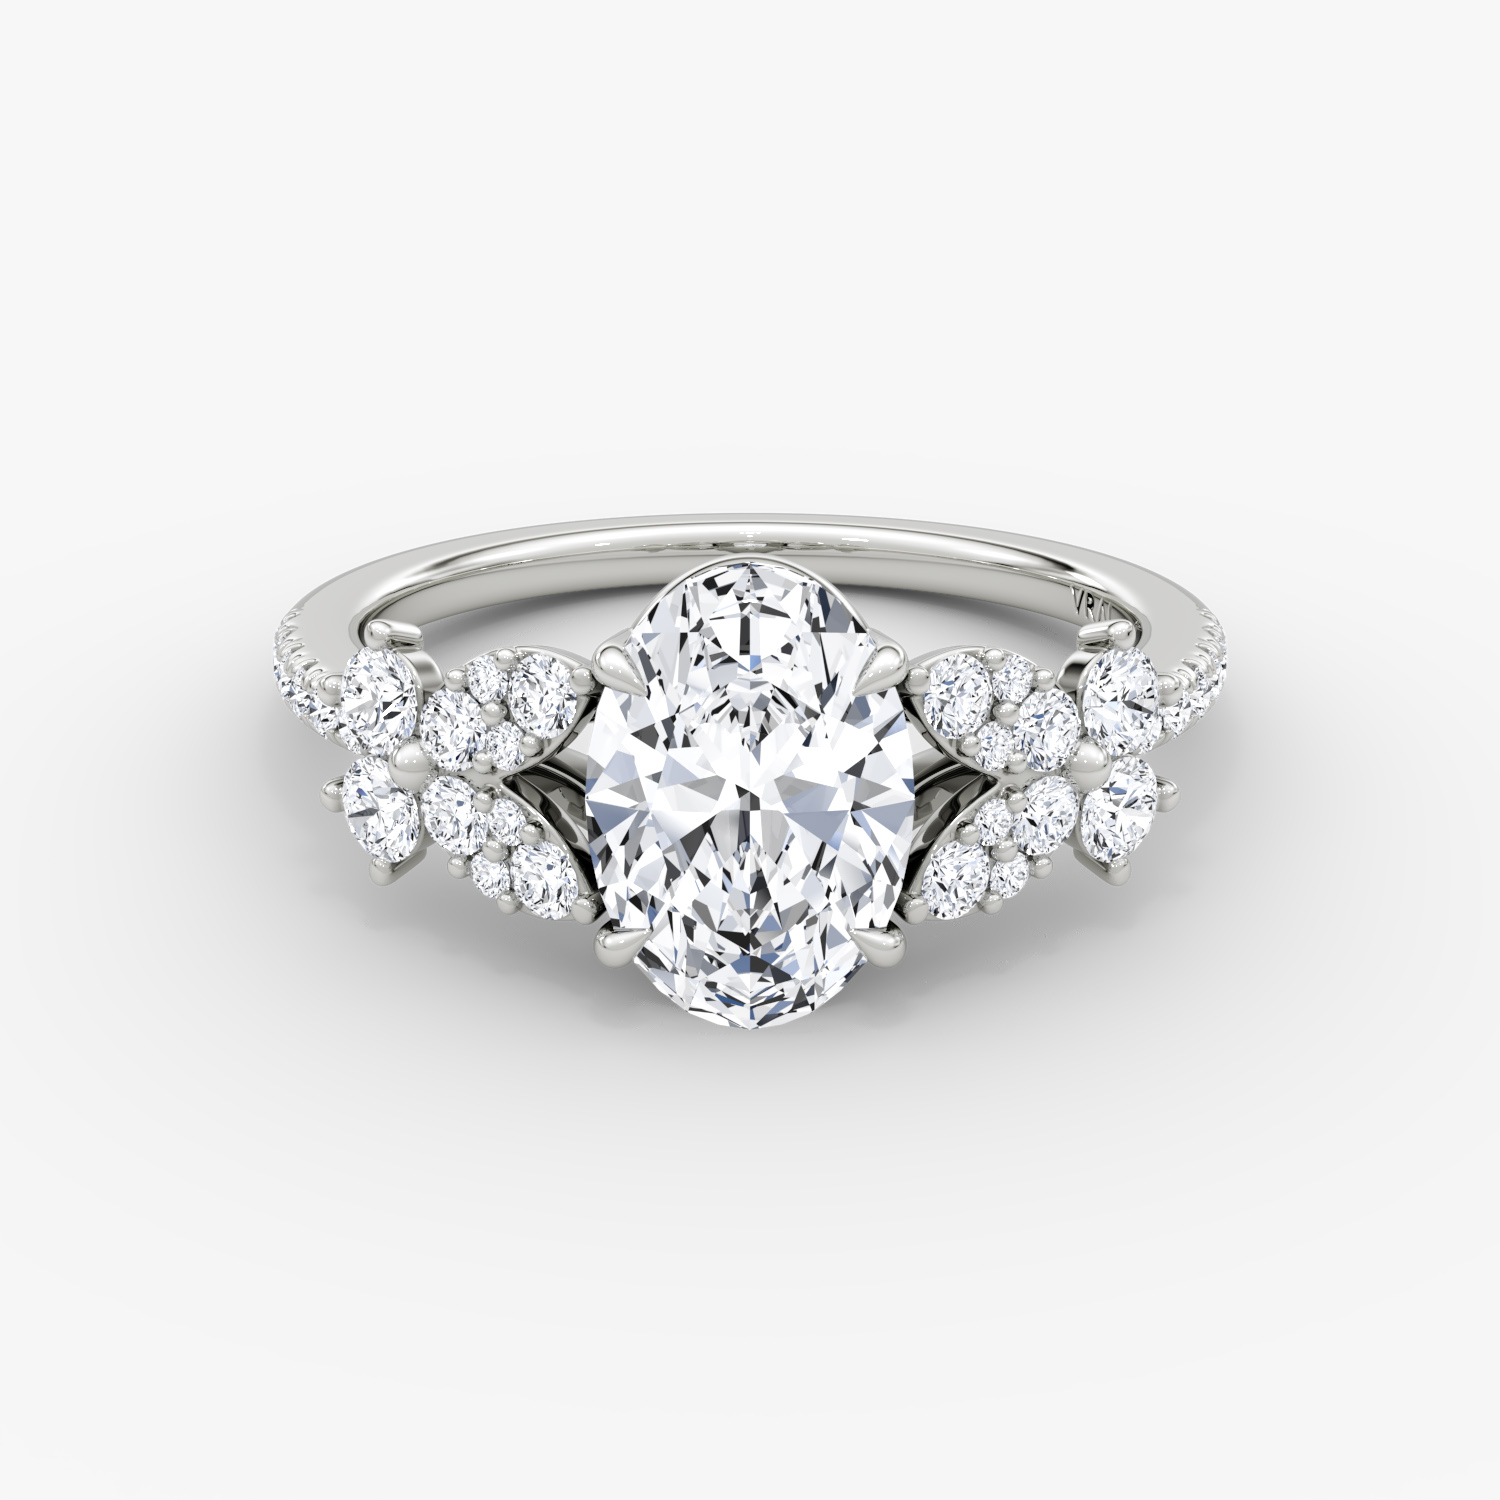 Oval Diamond Rings | How To Choose The Best One | Four Words